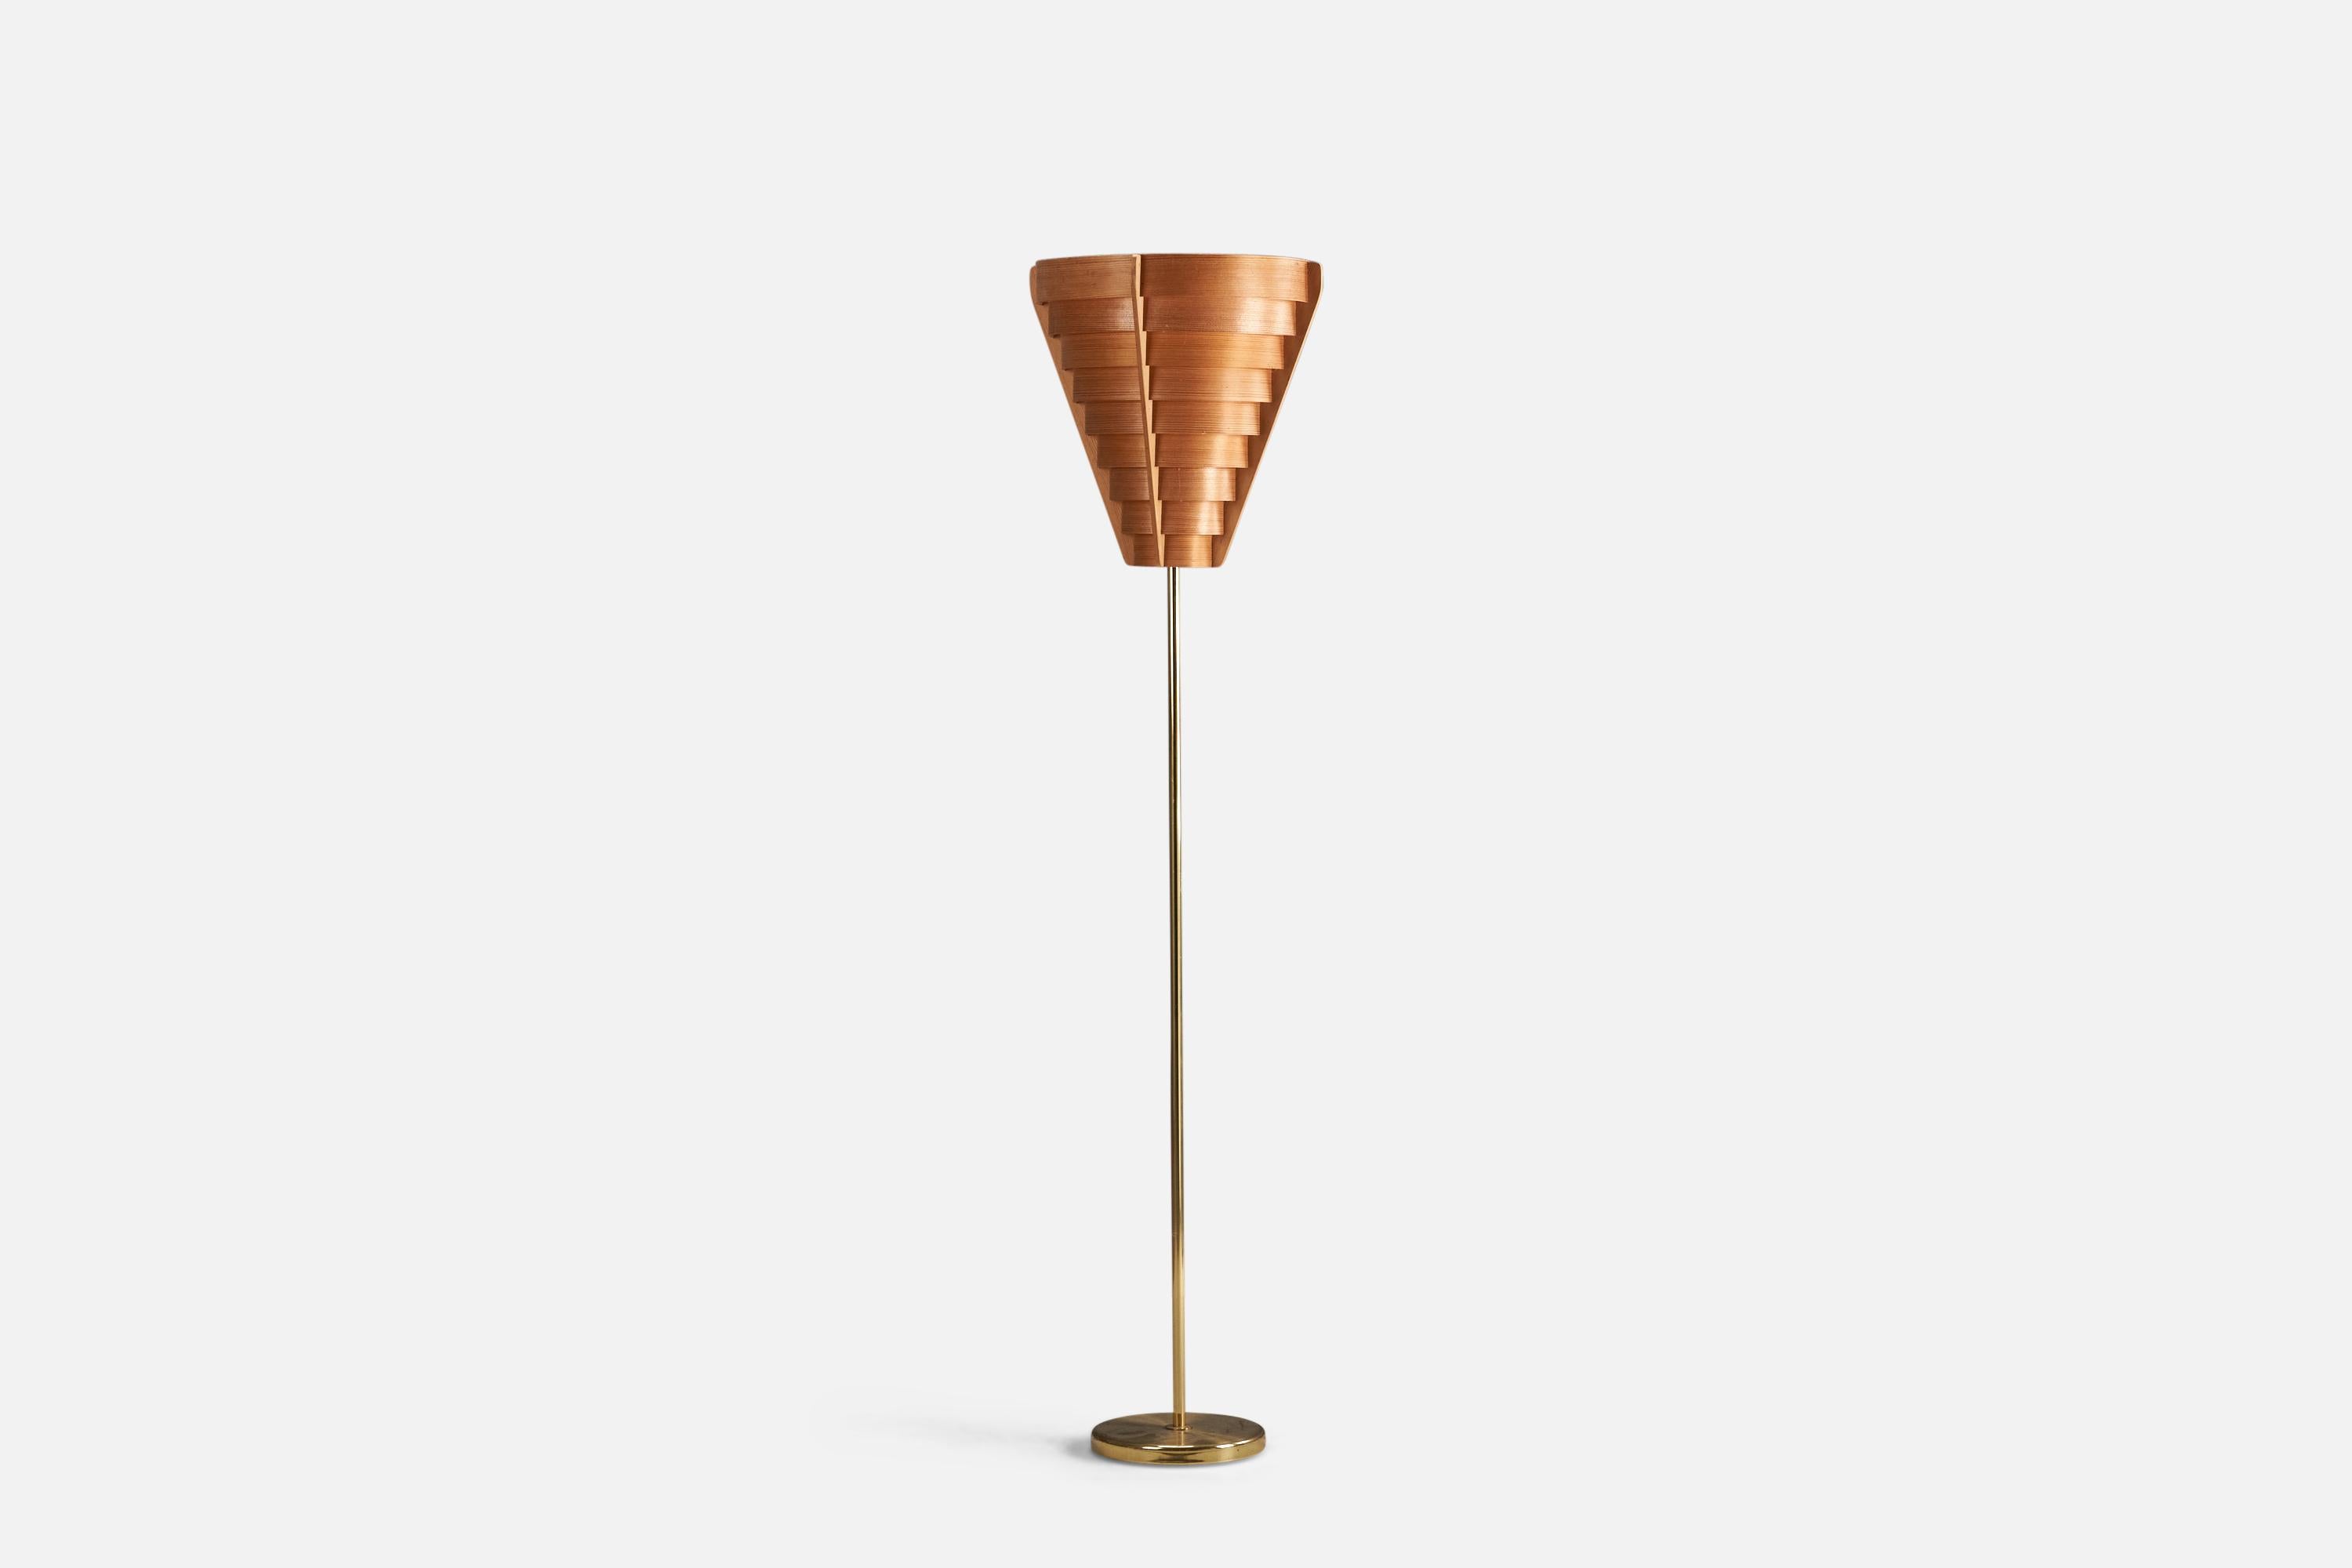 A brass, pine and moulded pine veneer floor lamp designed and produced by a Swedish Designer, Sweden, 1970s.

Assorted vintage pine lampshade.

Socket takes standard E-26 medium base bulb.

There is no maximum wattage stated on the fixture.